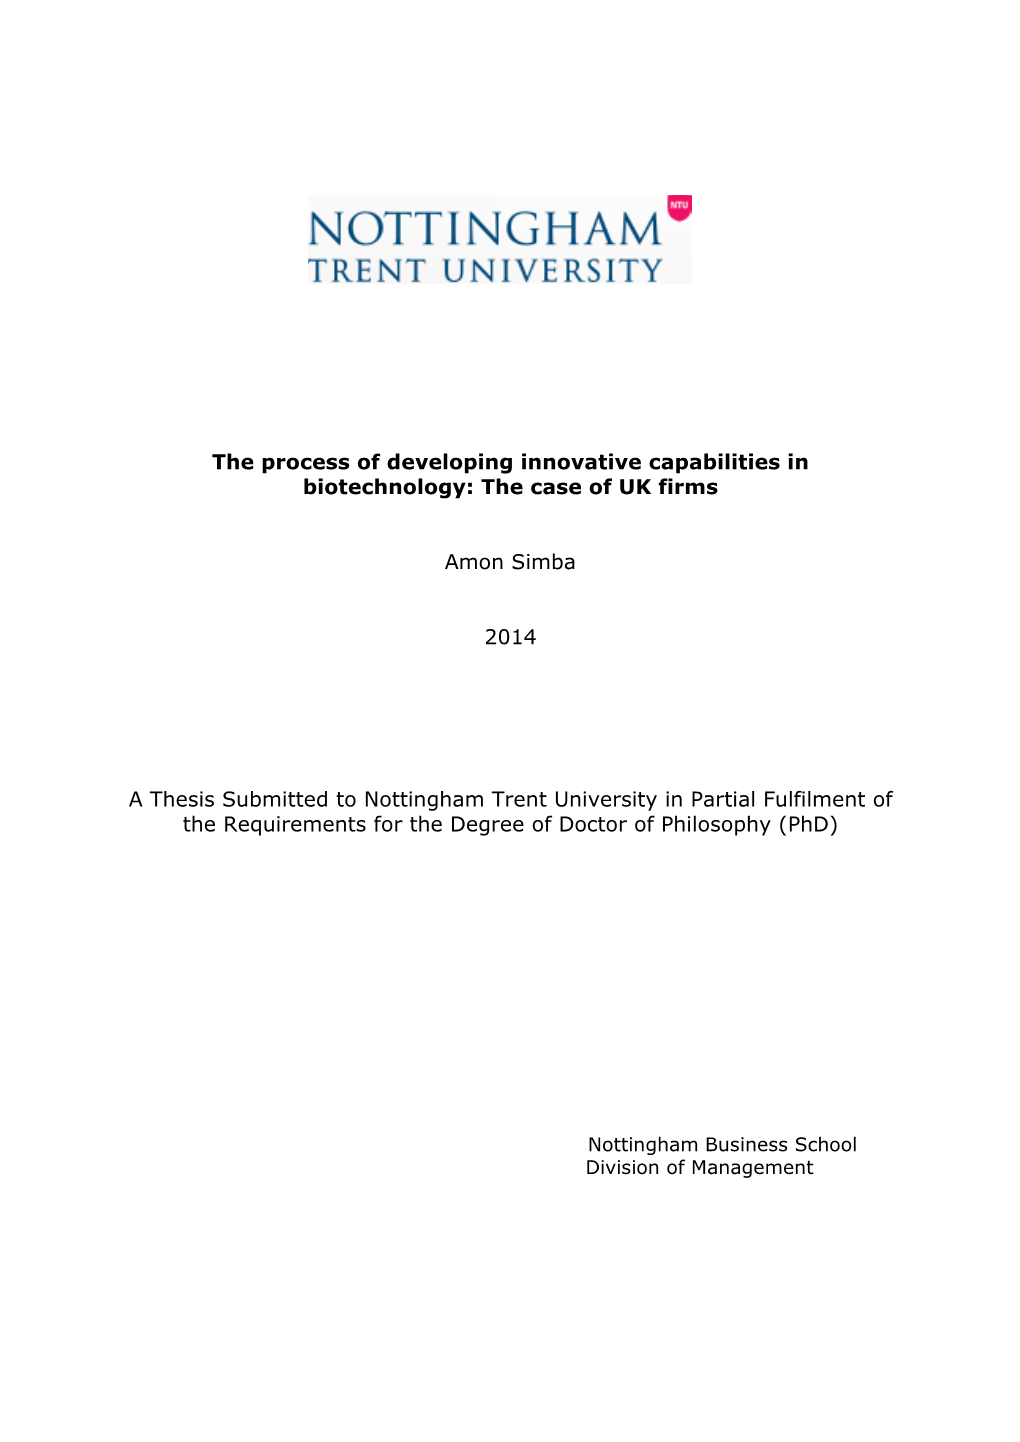 The Case of UK Firms Amon Simba 2014 a Thesis